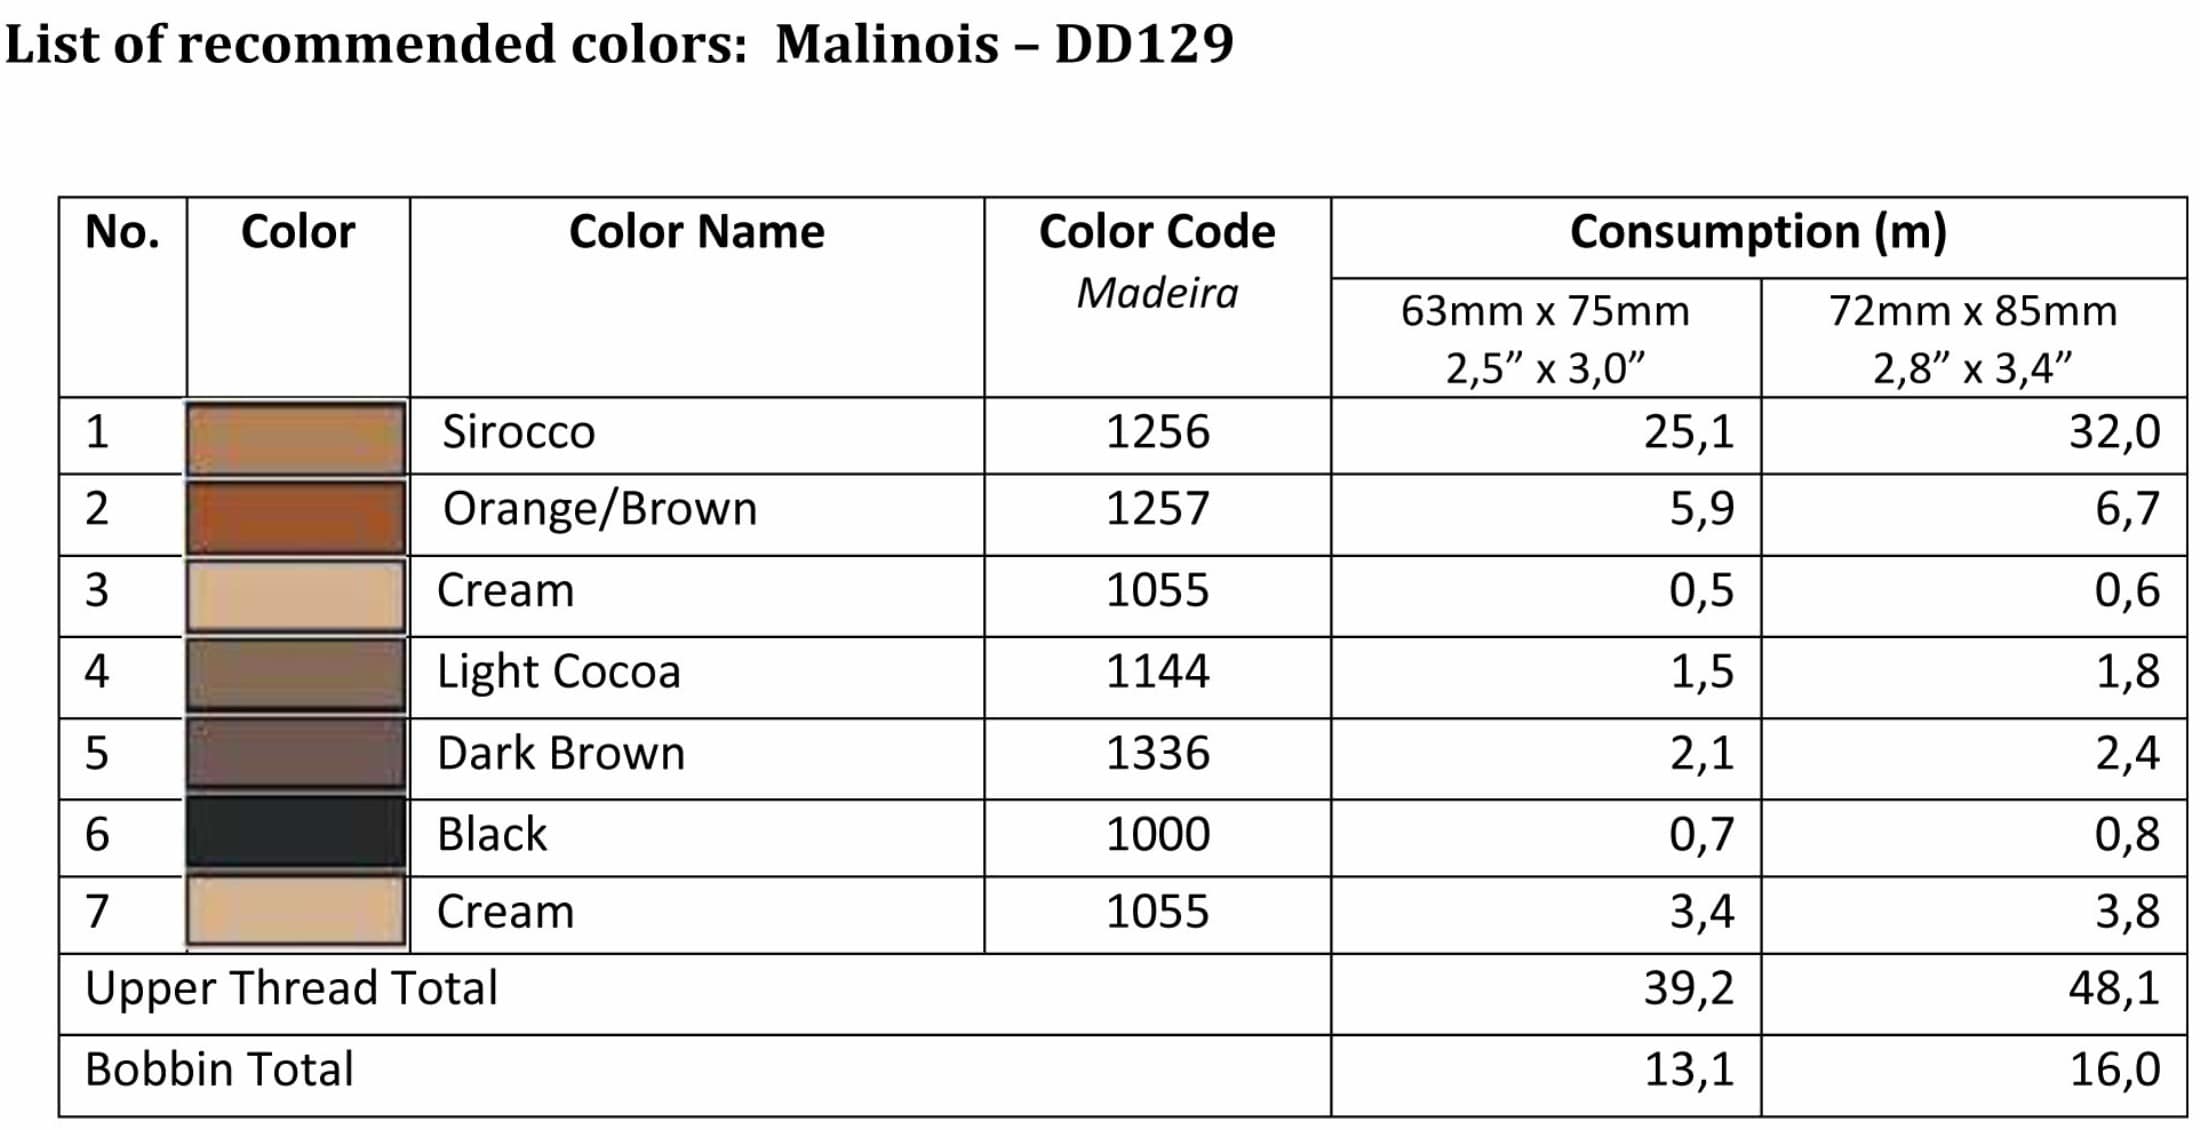 List of recommended colors - DD129